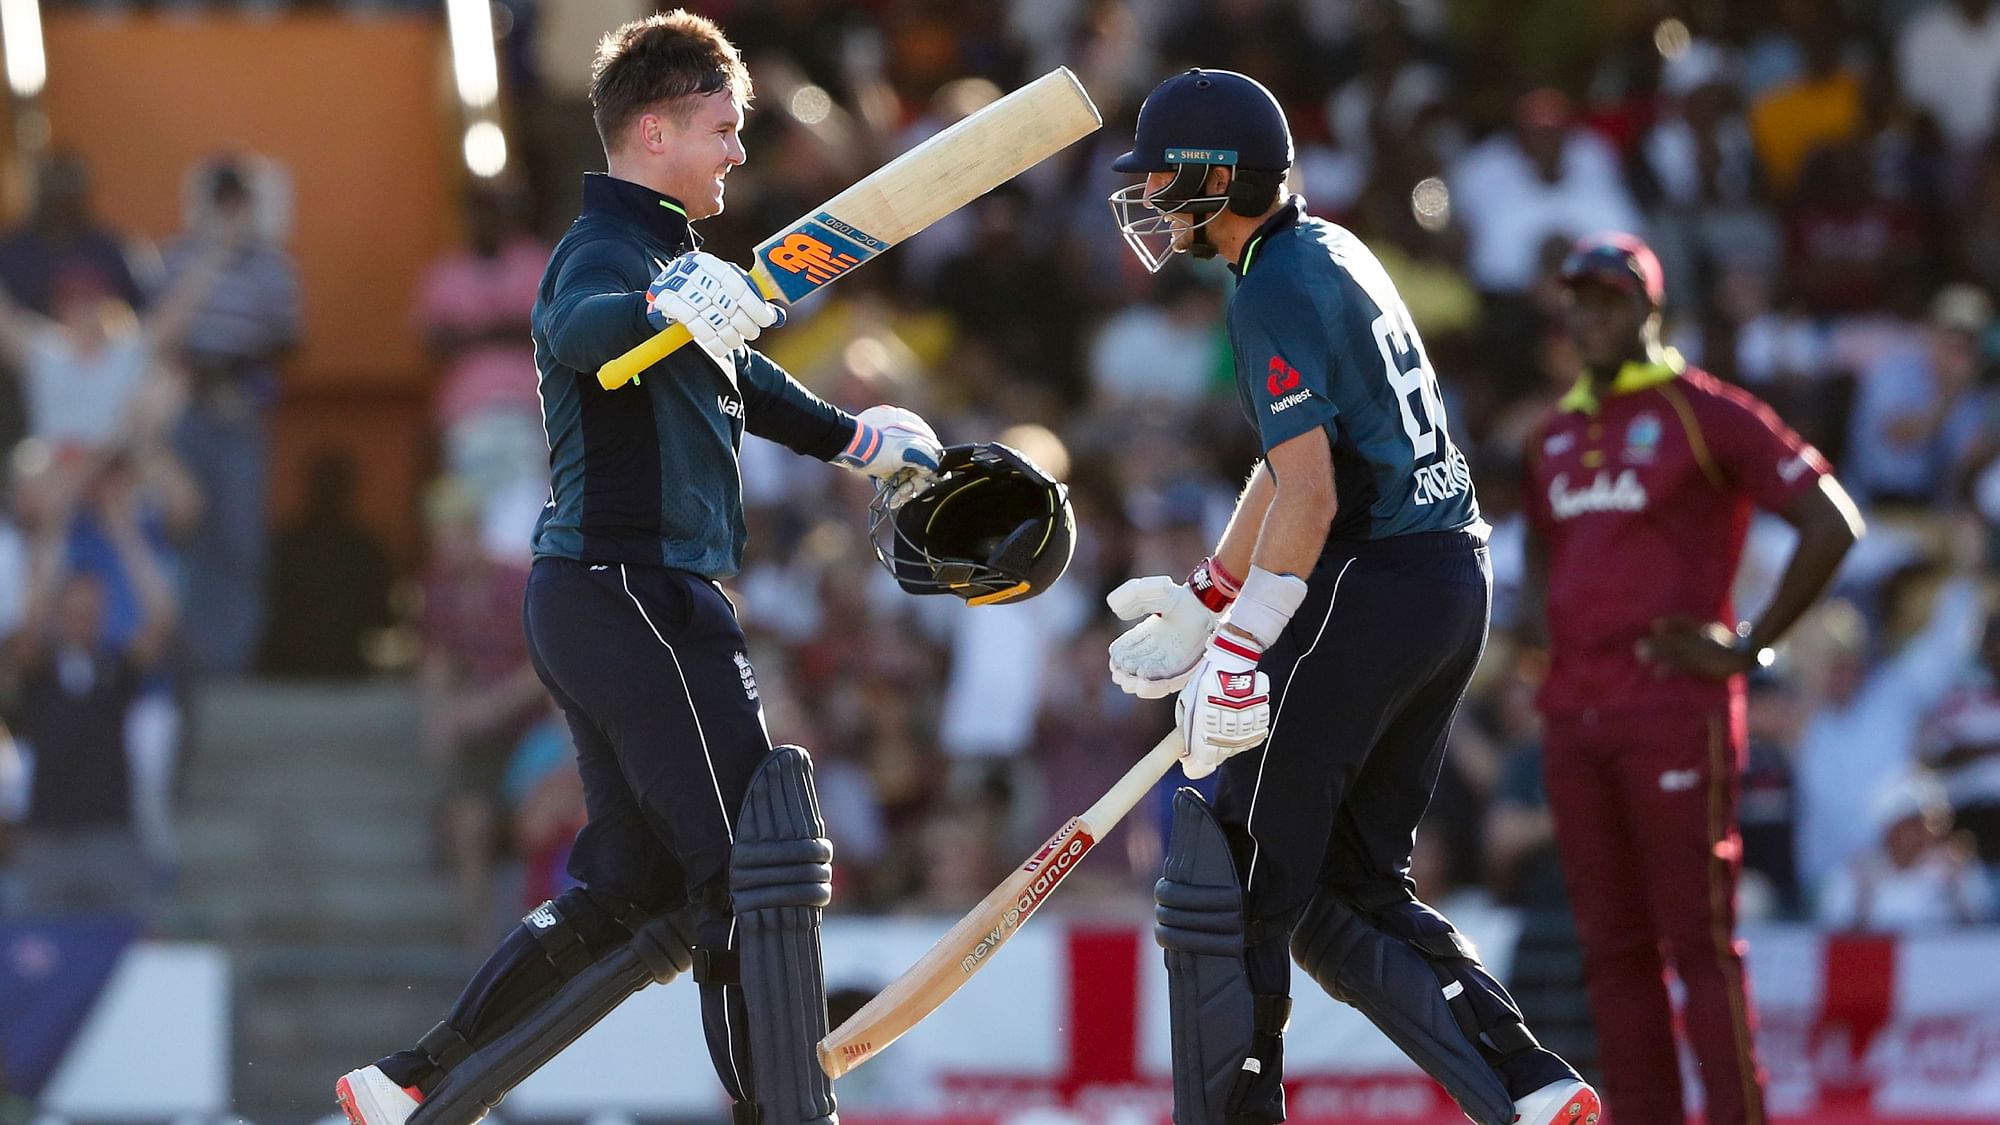 Jason Roy (left) and Joe Root hit centuries as England pulled off a record 361-run chase in their first ODI against West Indies at Barbados.